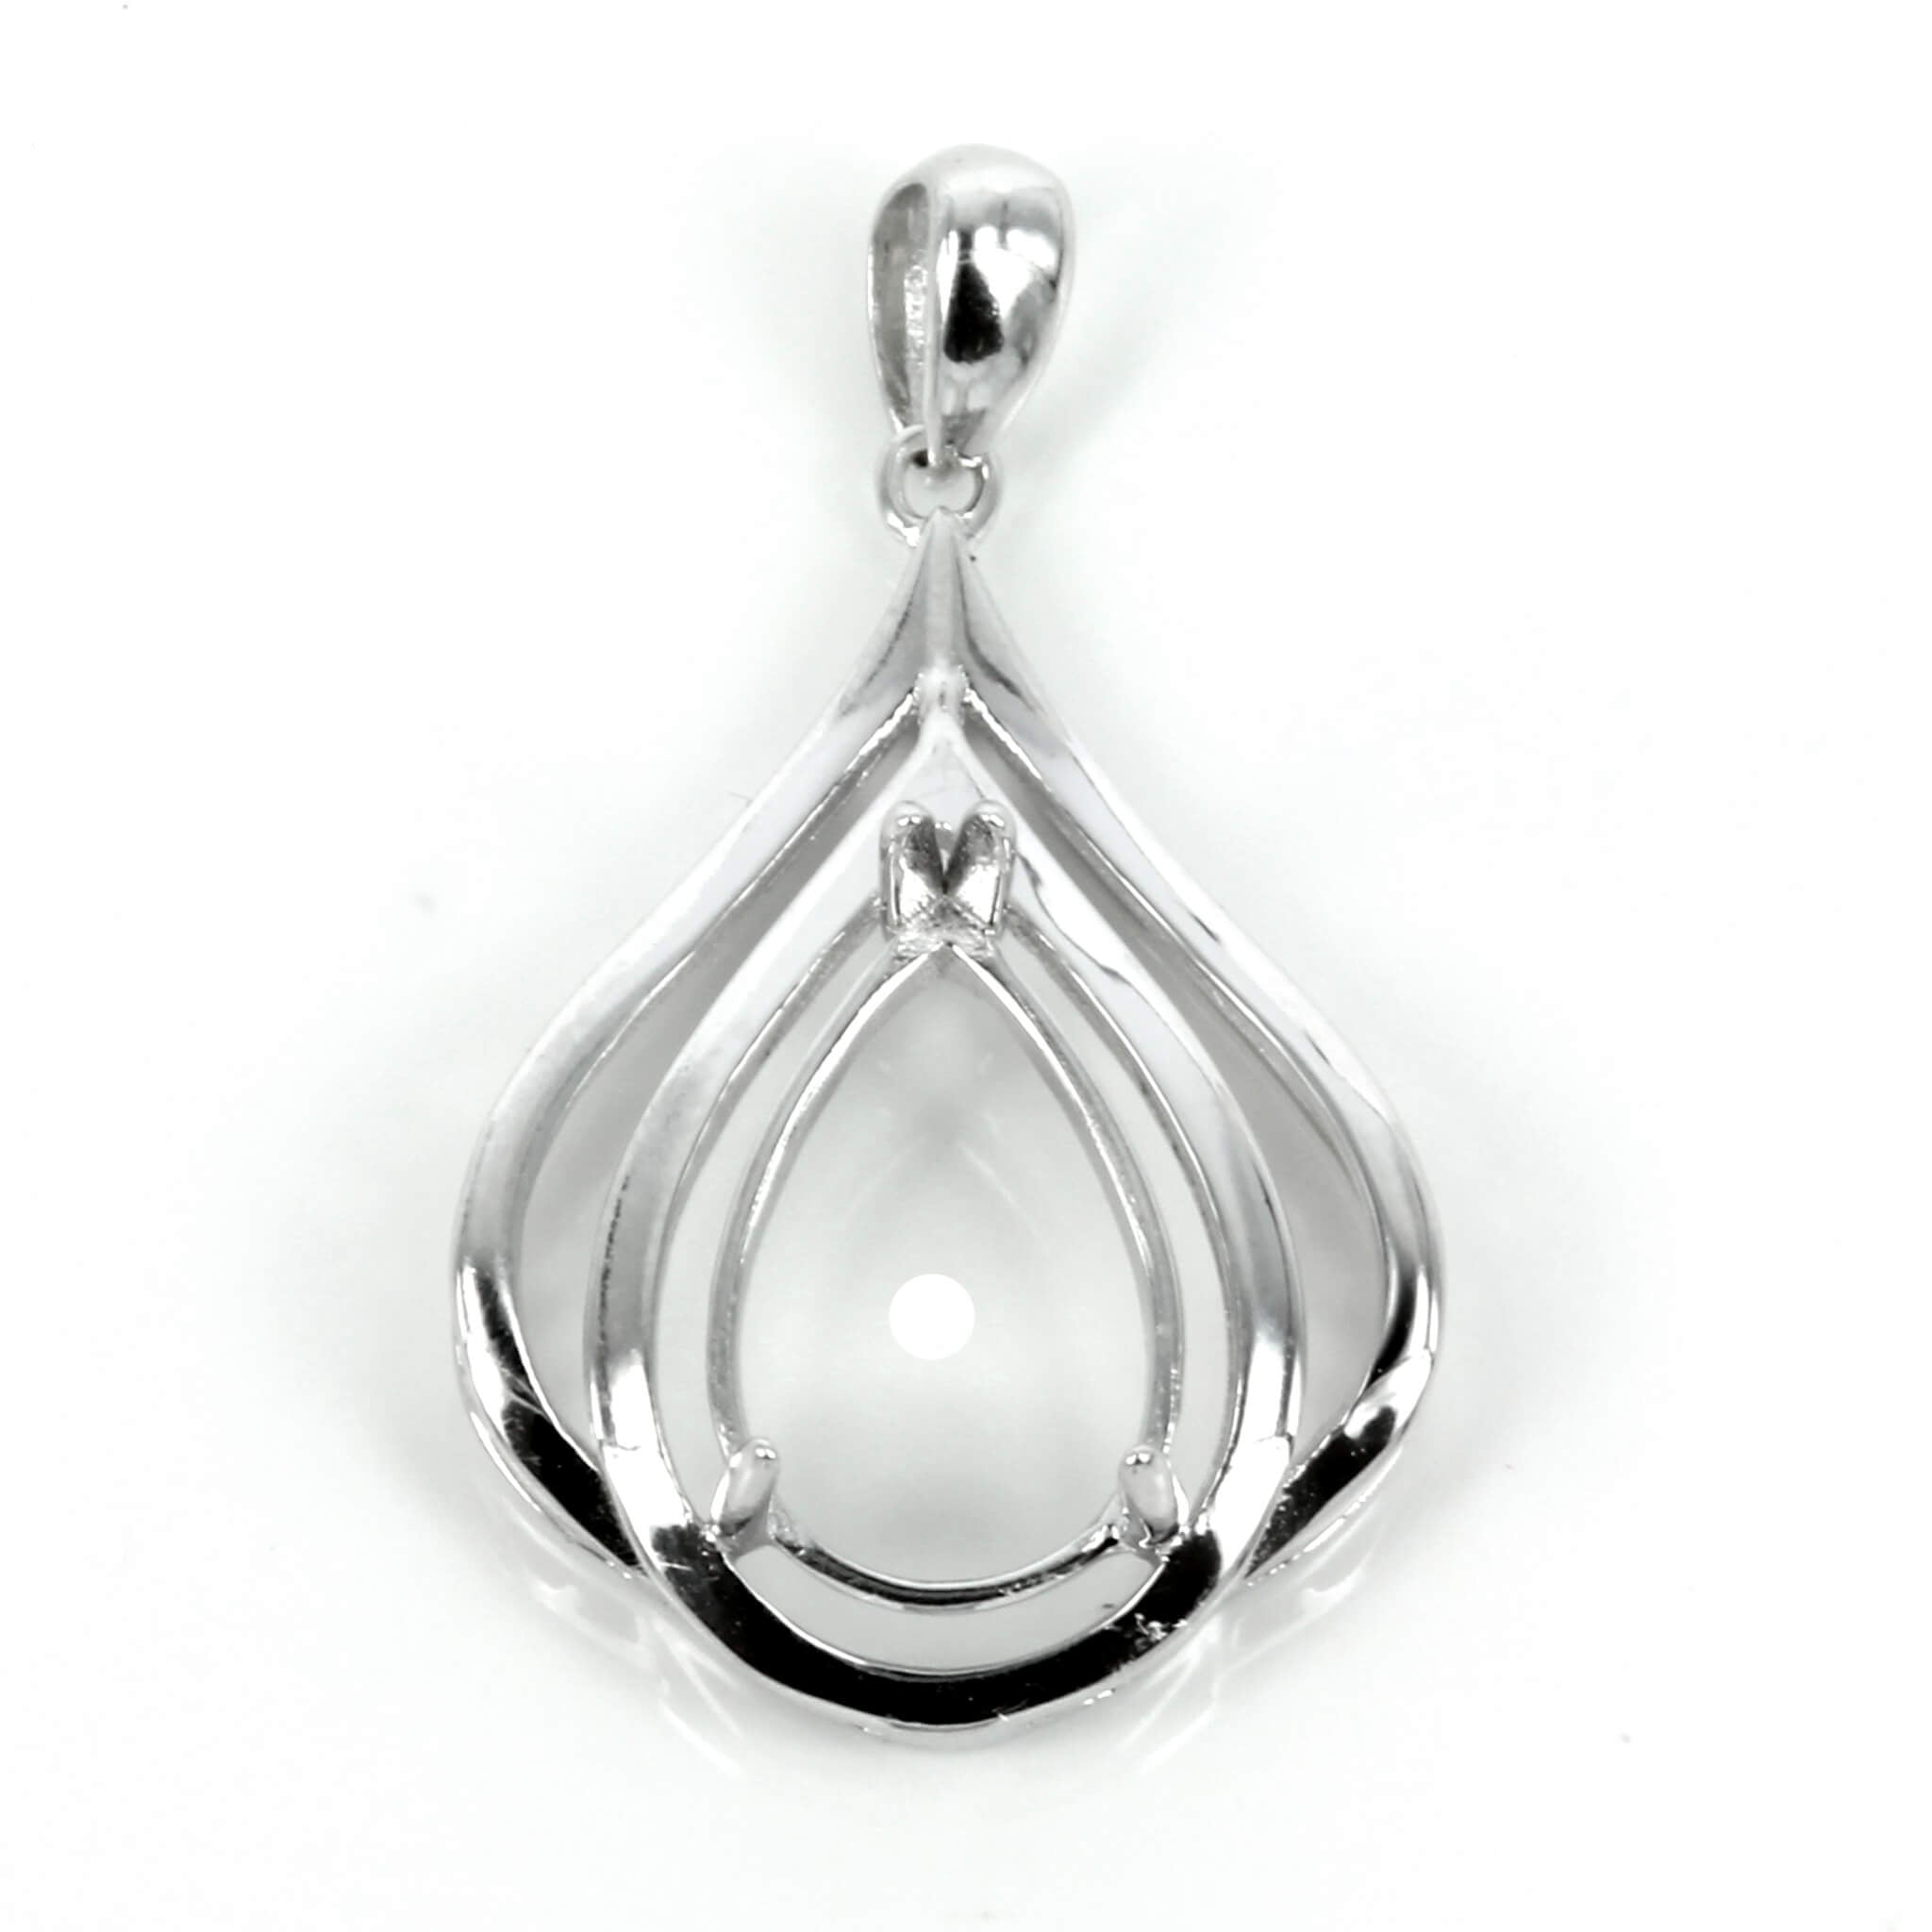 Pear shaped pendant with soldered loop and bail in sterling silver for 8x12mm pear shaped stones